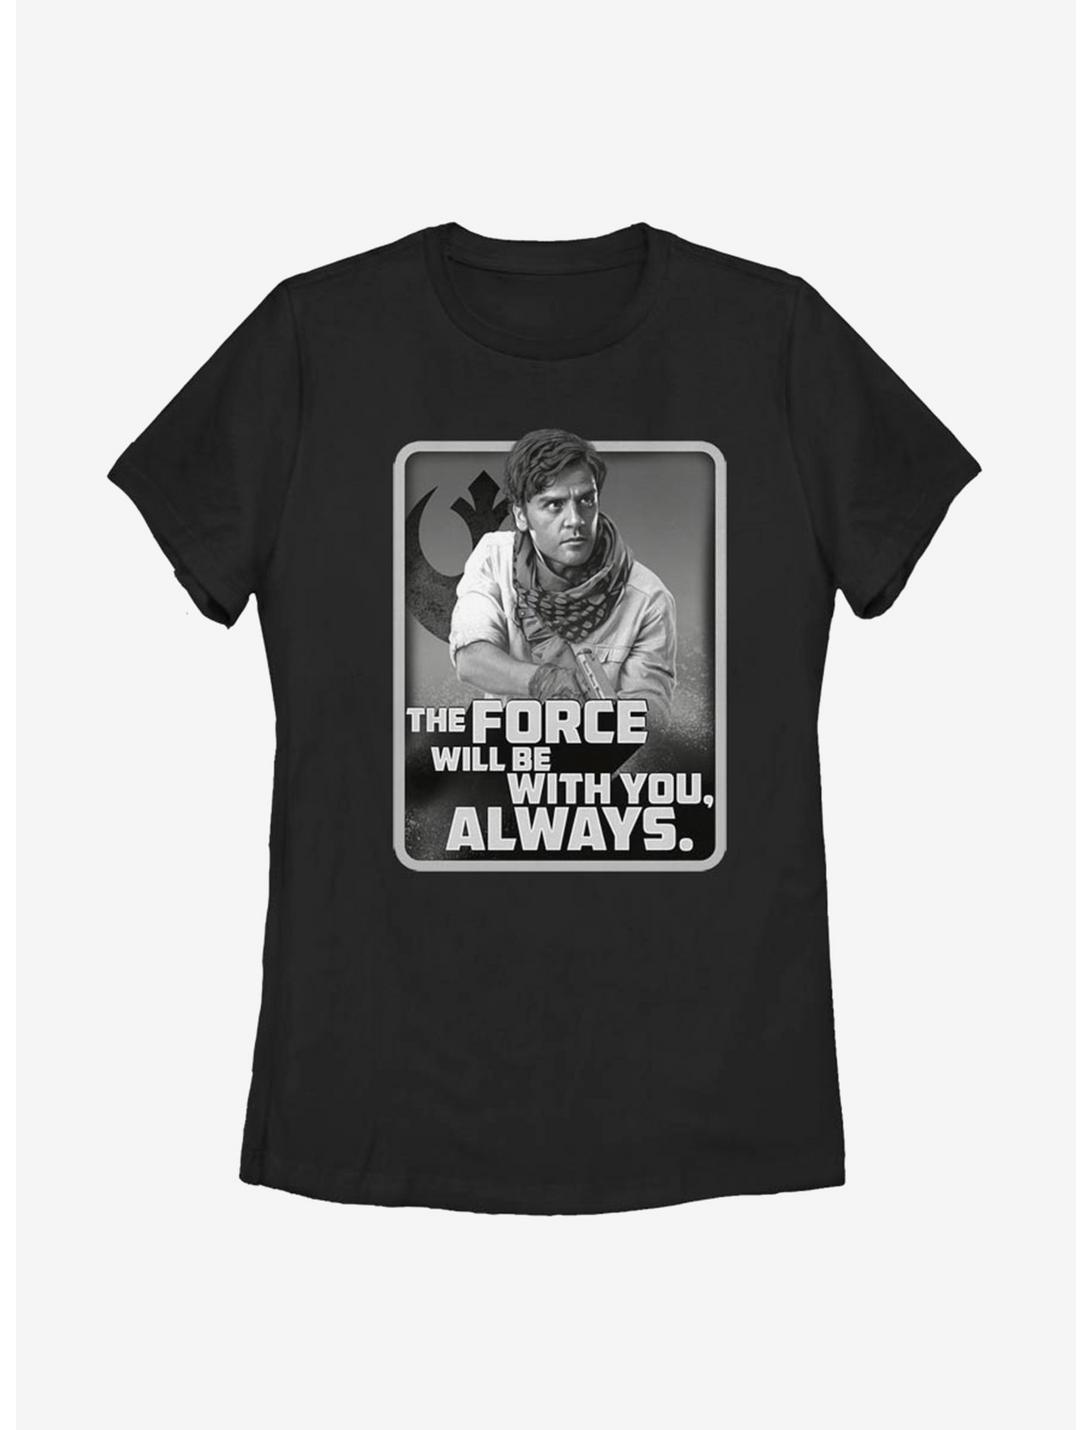 Star Wars Episode IX The Rise Of Skywalker With You Poe Womens T-Shirt, BLACK, hi-res